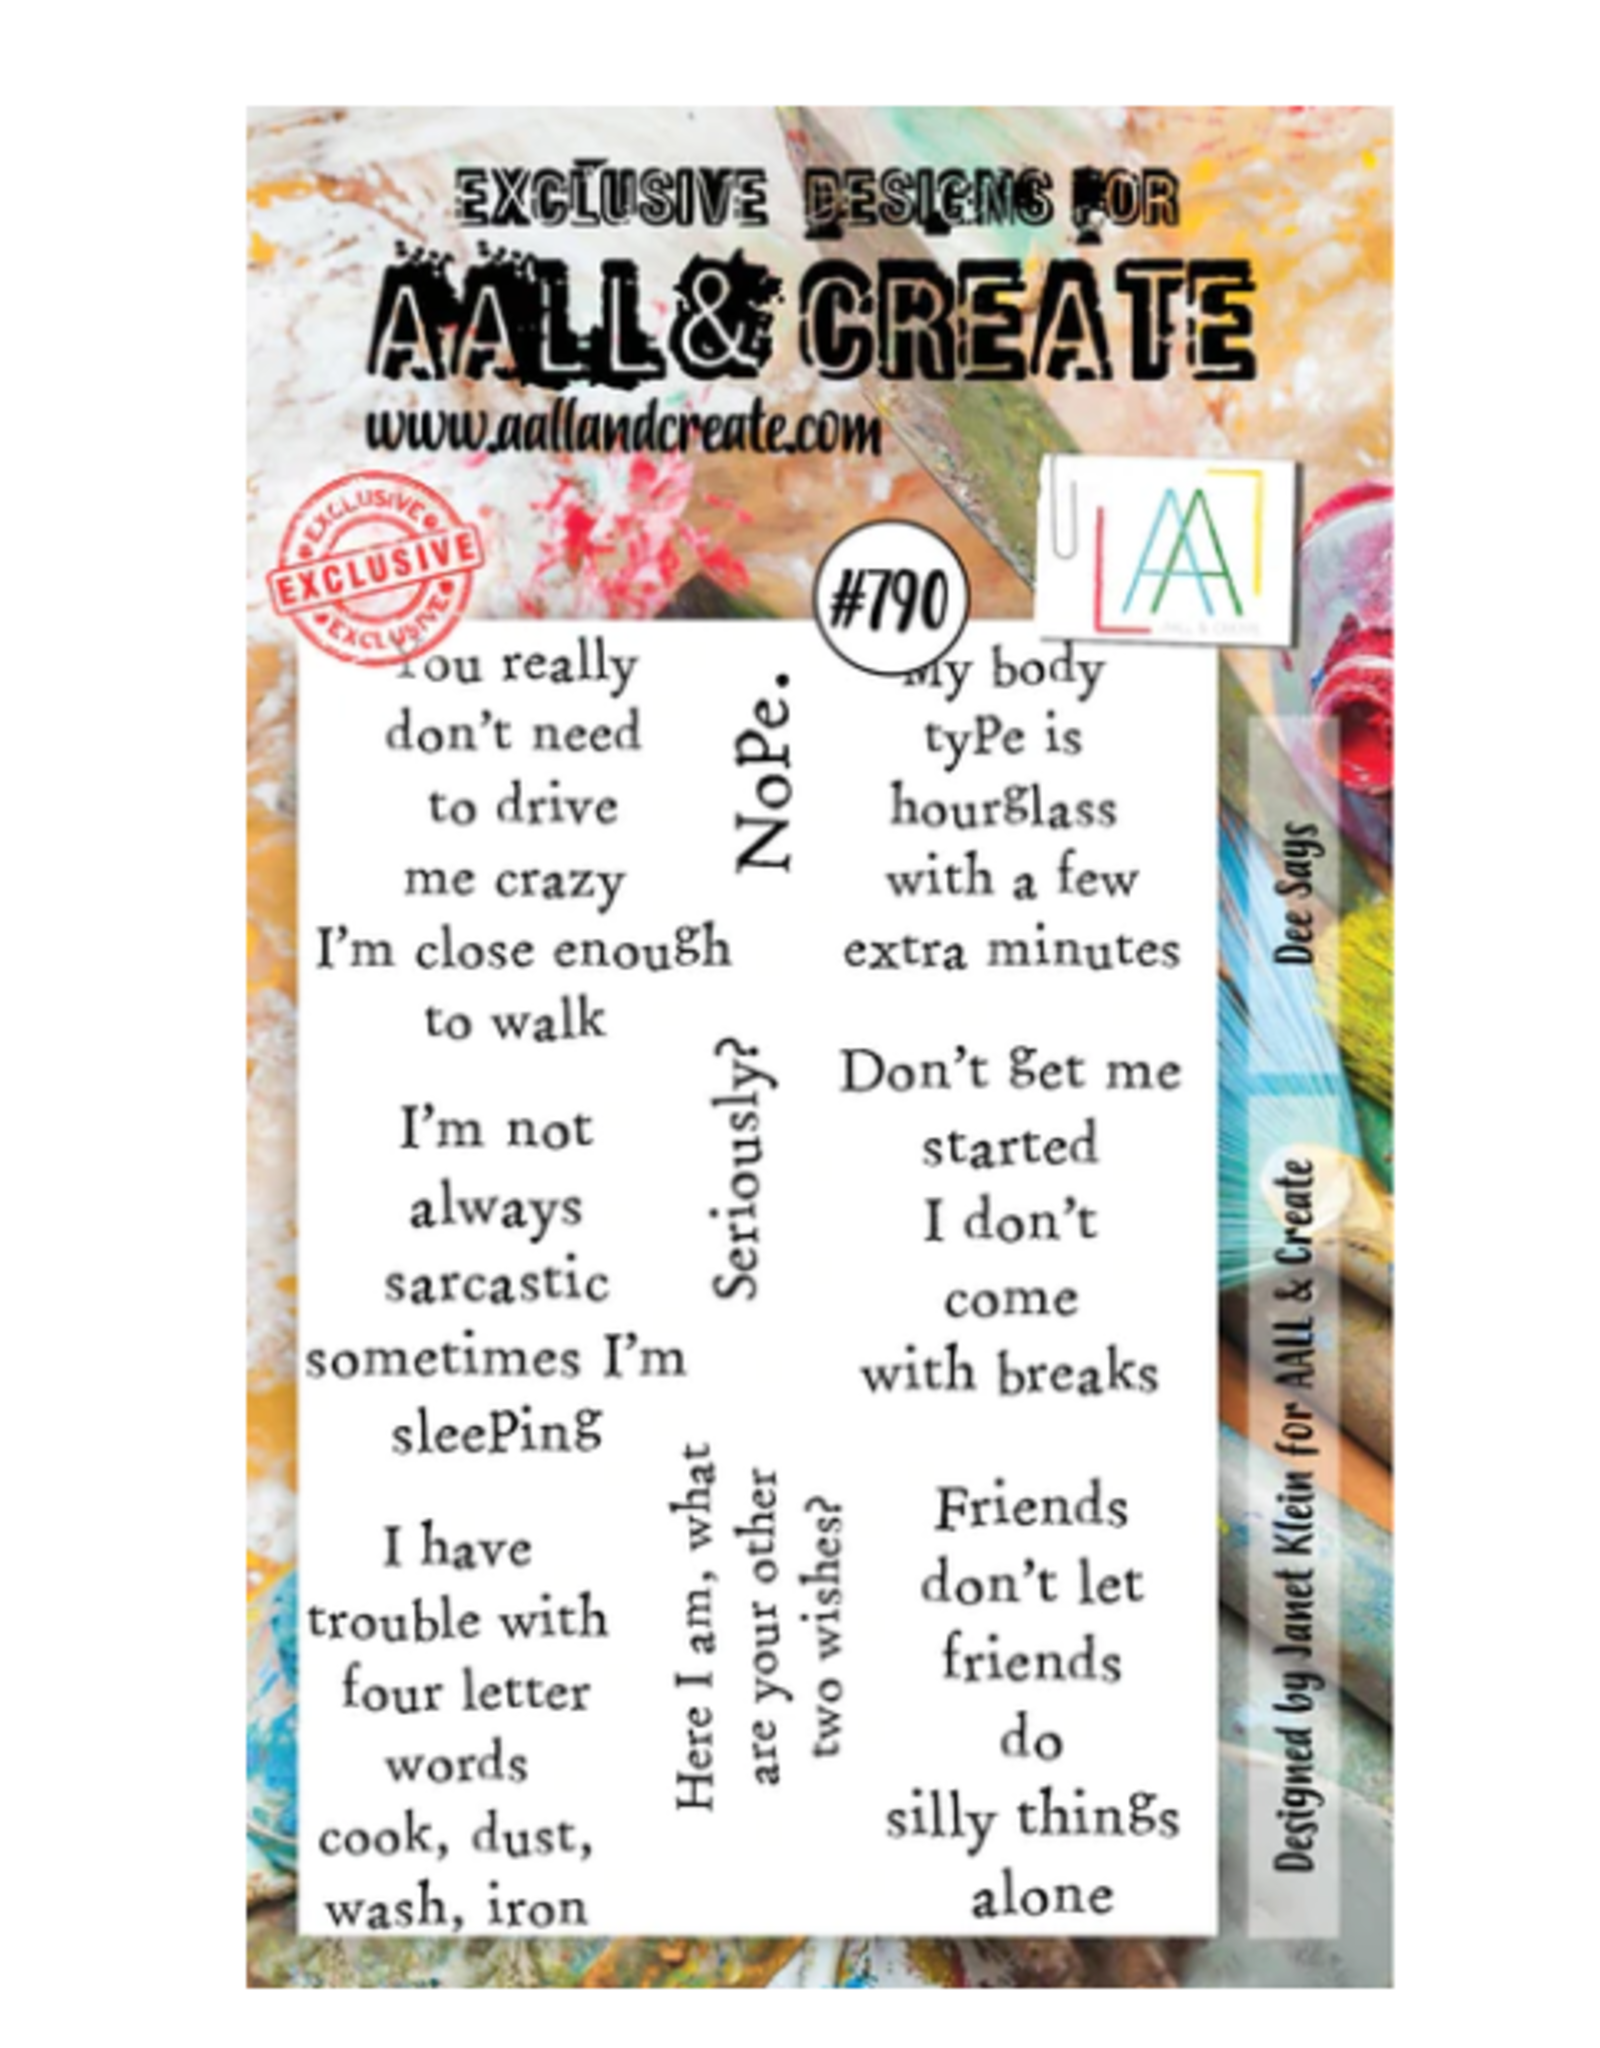 AALL & CREATE AALL & CREATE JANET KLEIN #790 DEE SAYS A6 ACRYLIC STAMP SET